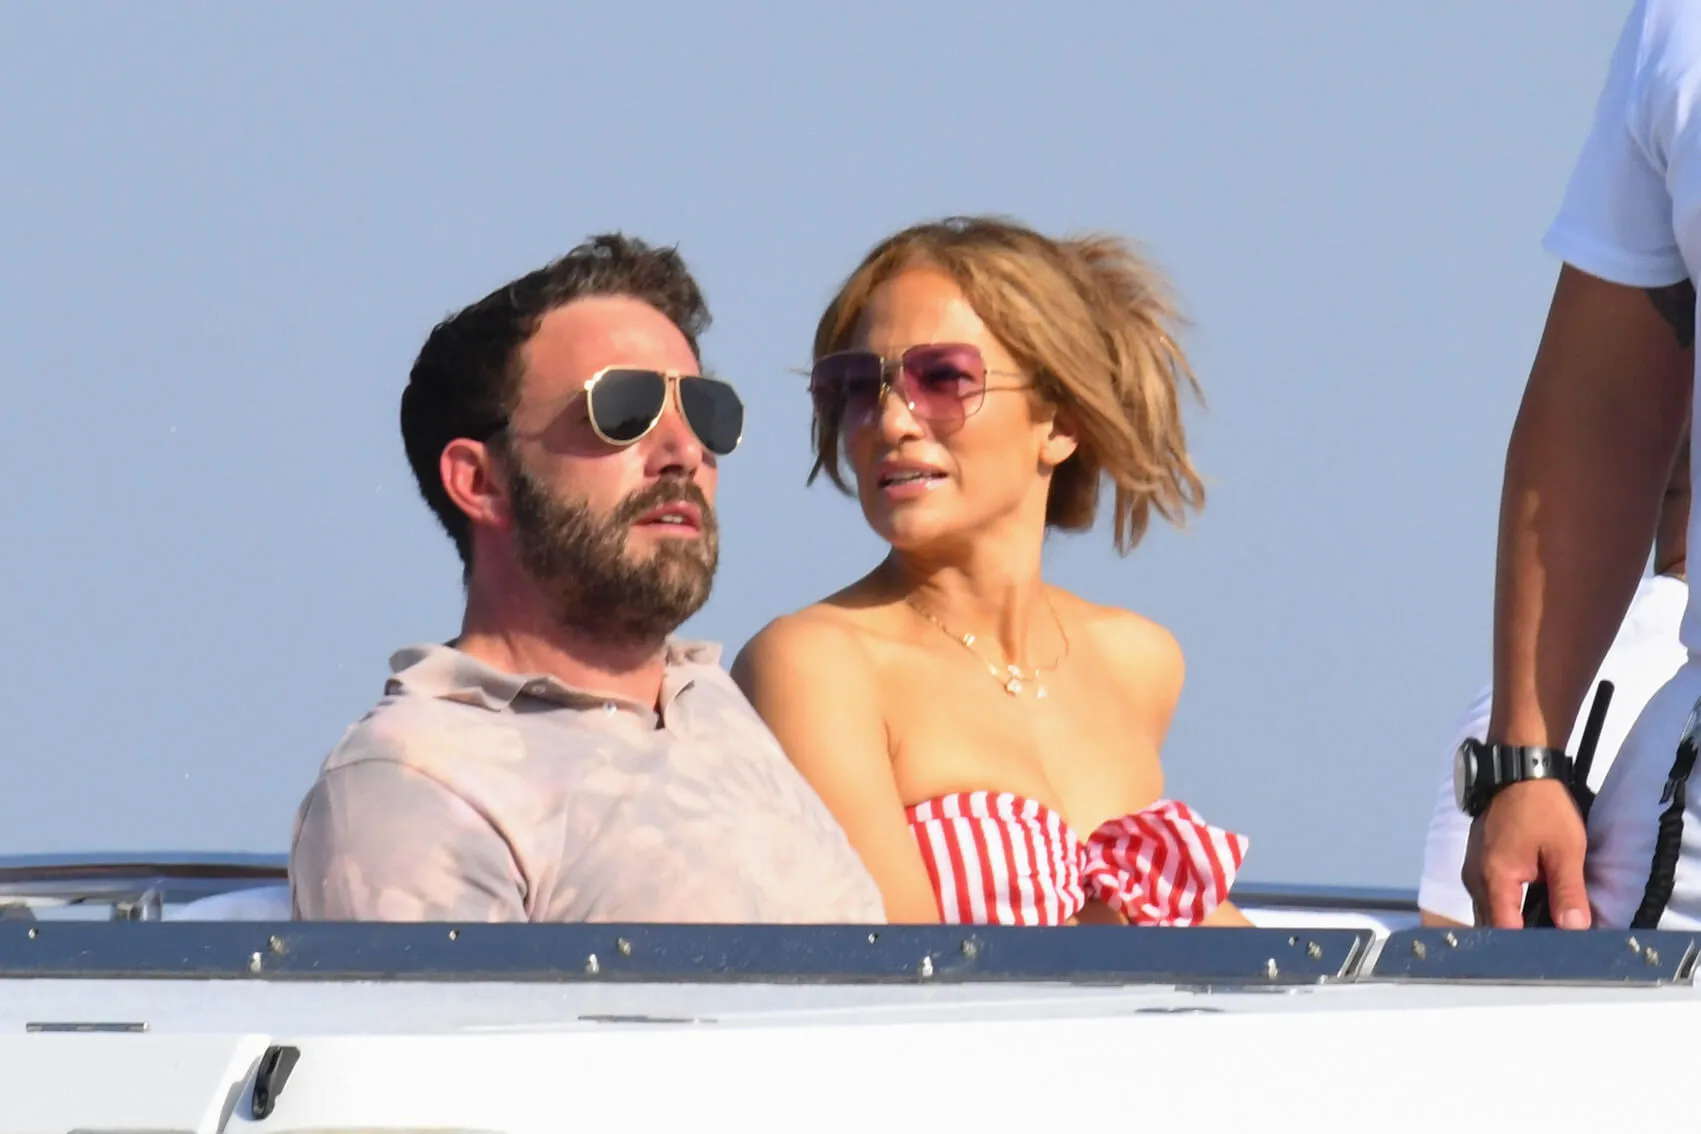 Ben Affleck and Jennifer Lopez sitting next to each other and wearing sunglasses on a boat in Italy in 2021